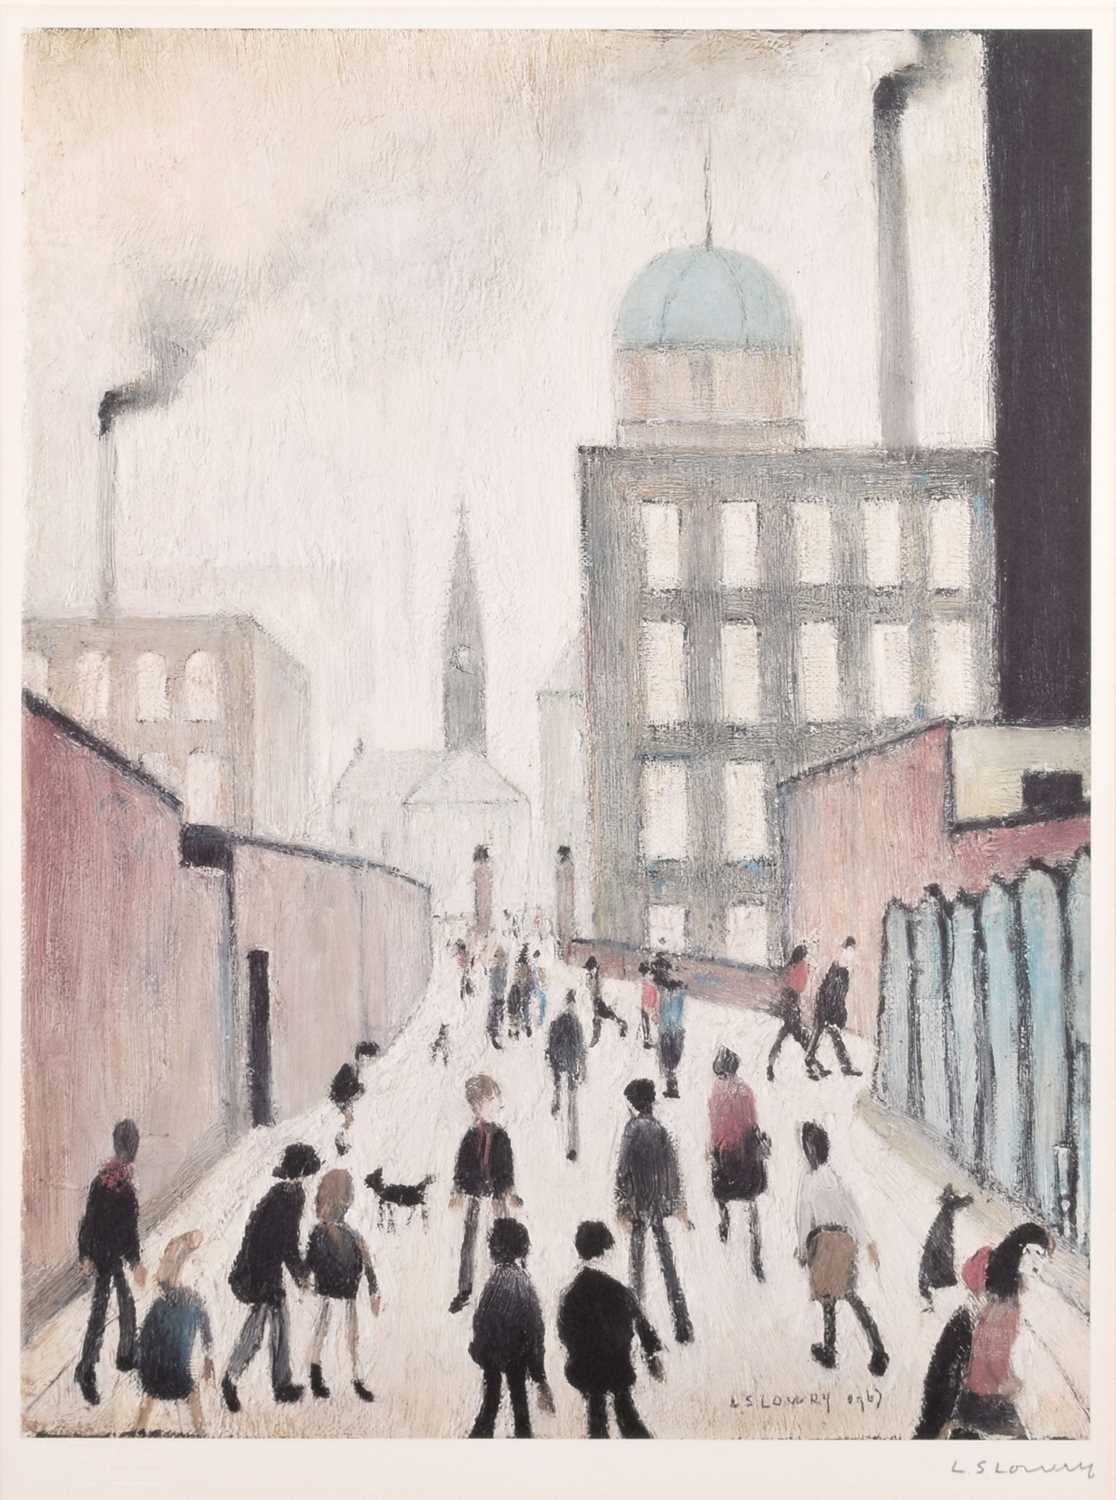 L.S. Lowry R.A. (British 1887-1976) "Mrs Swindell's Picture"